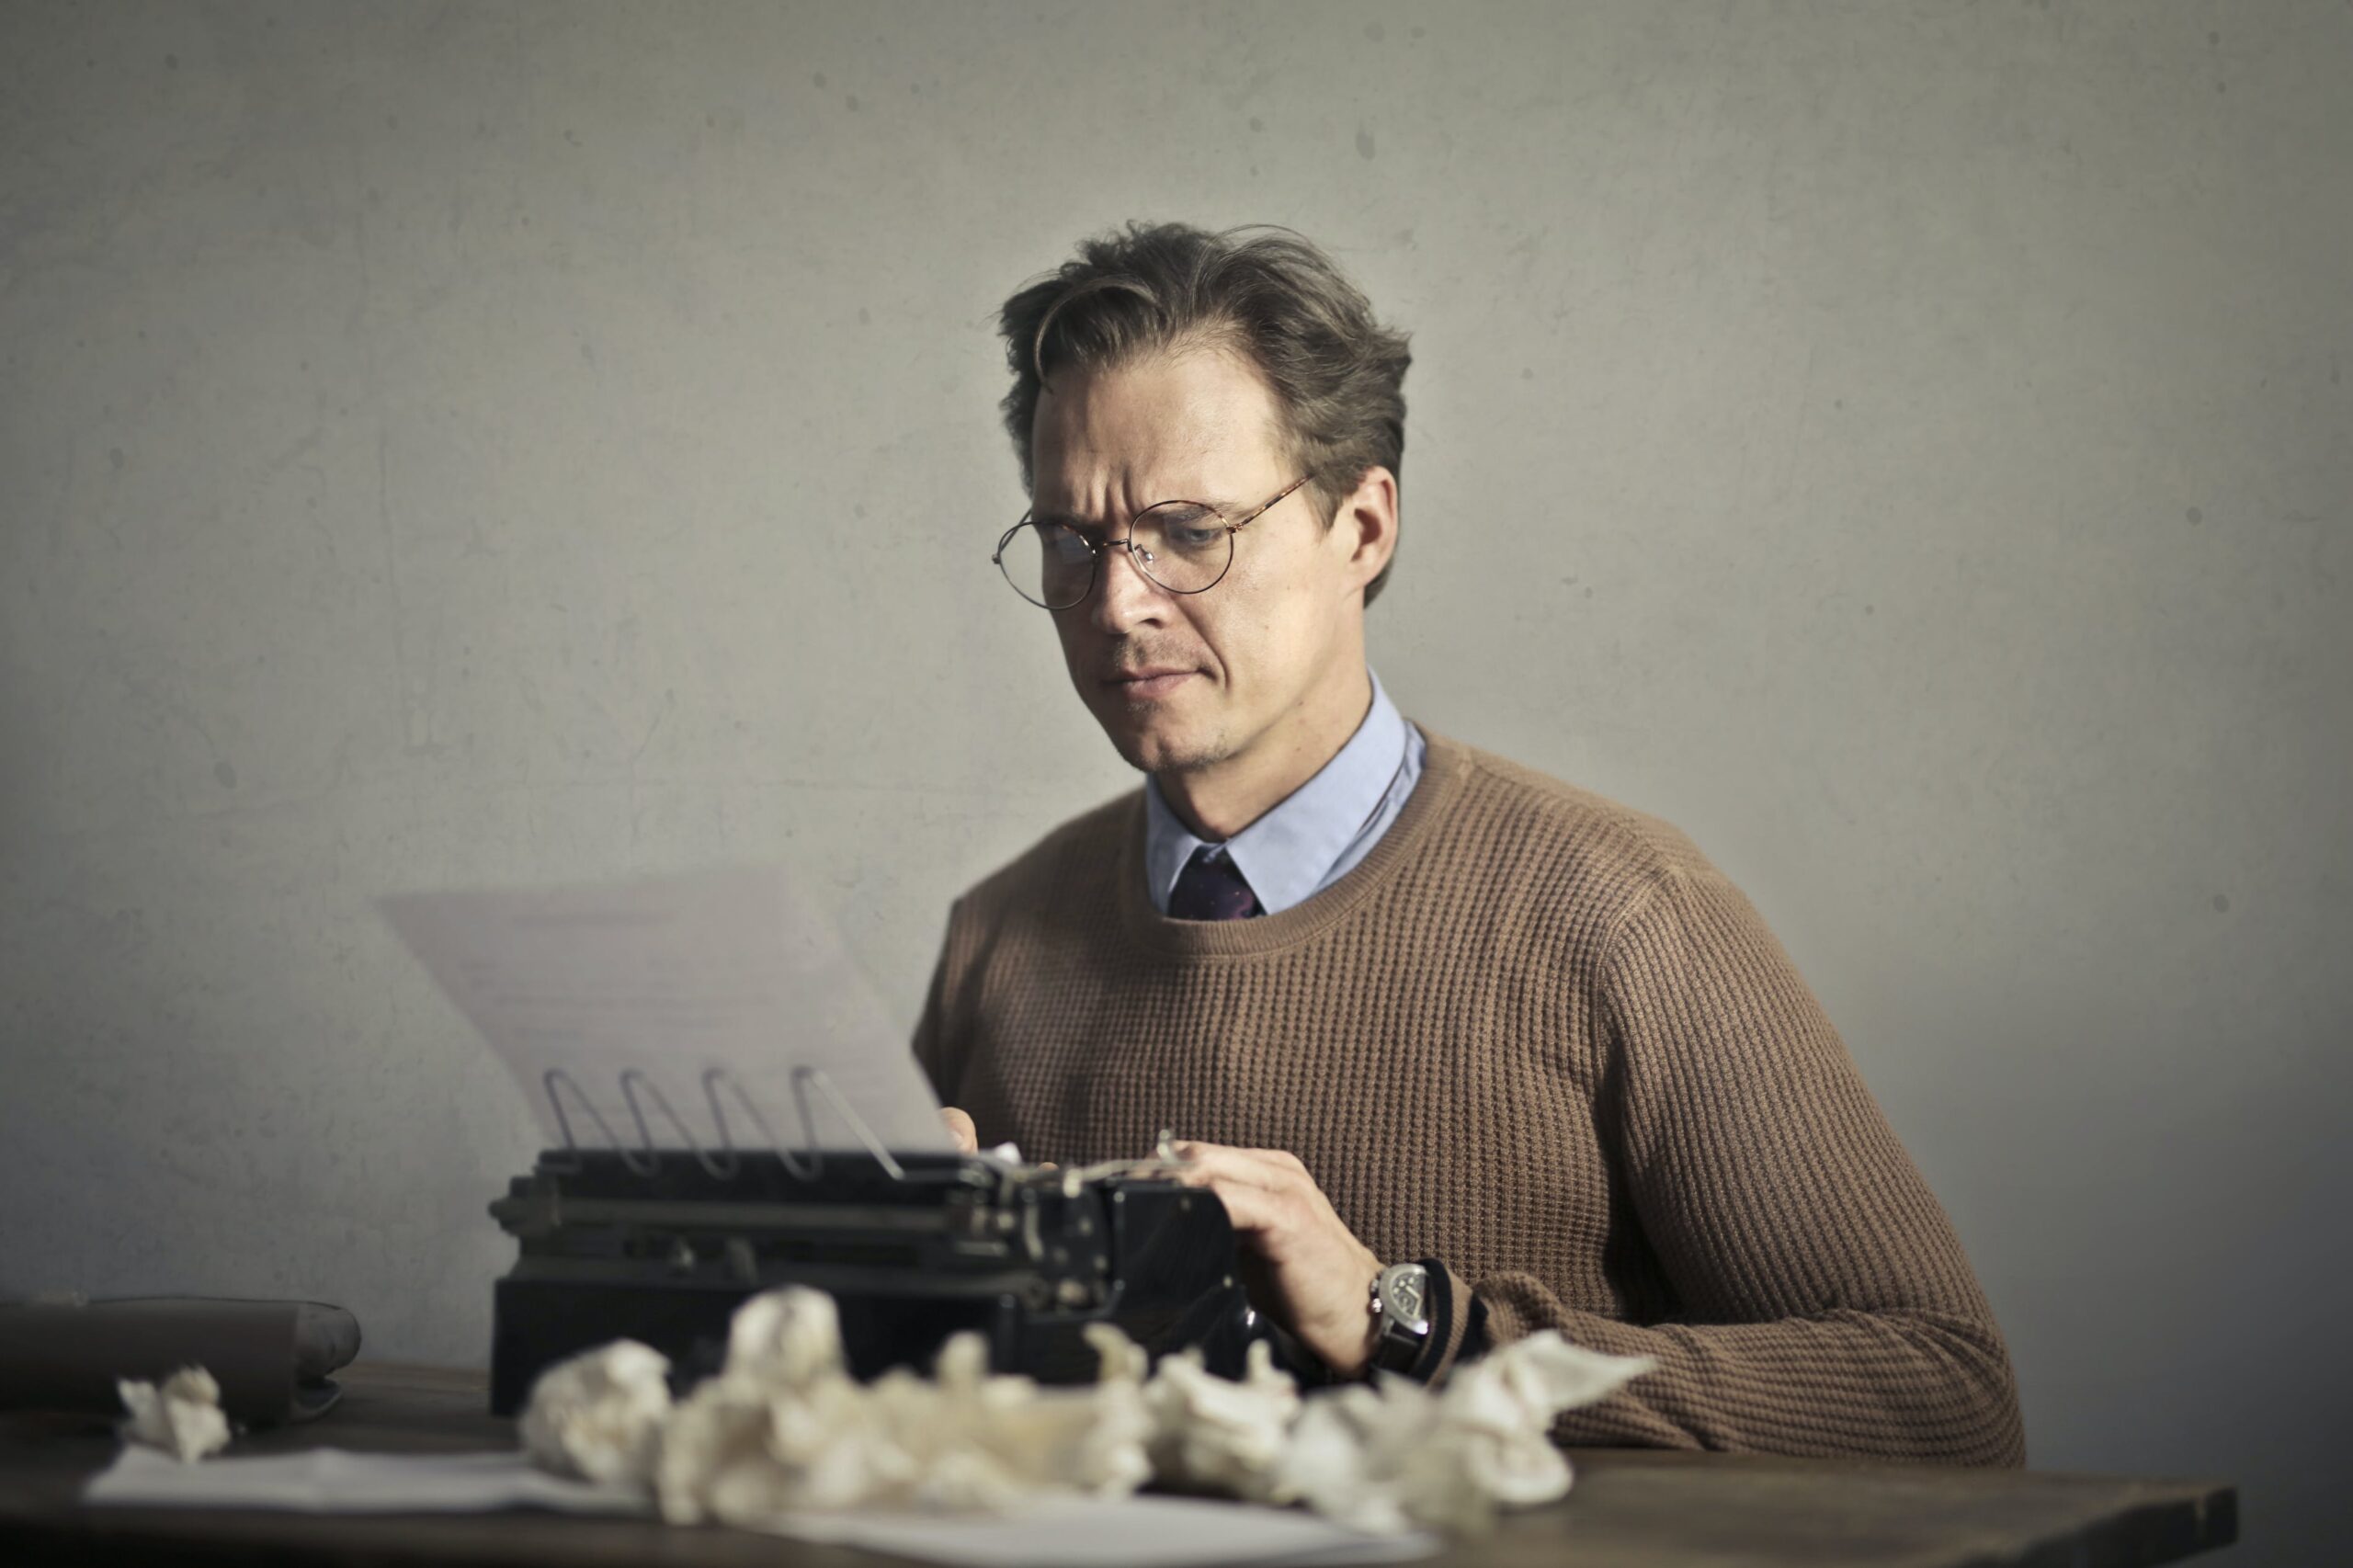 A man wearing a knit sweater furrows his brows, typing furiously on a typewriter.